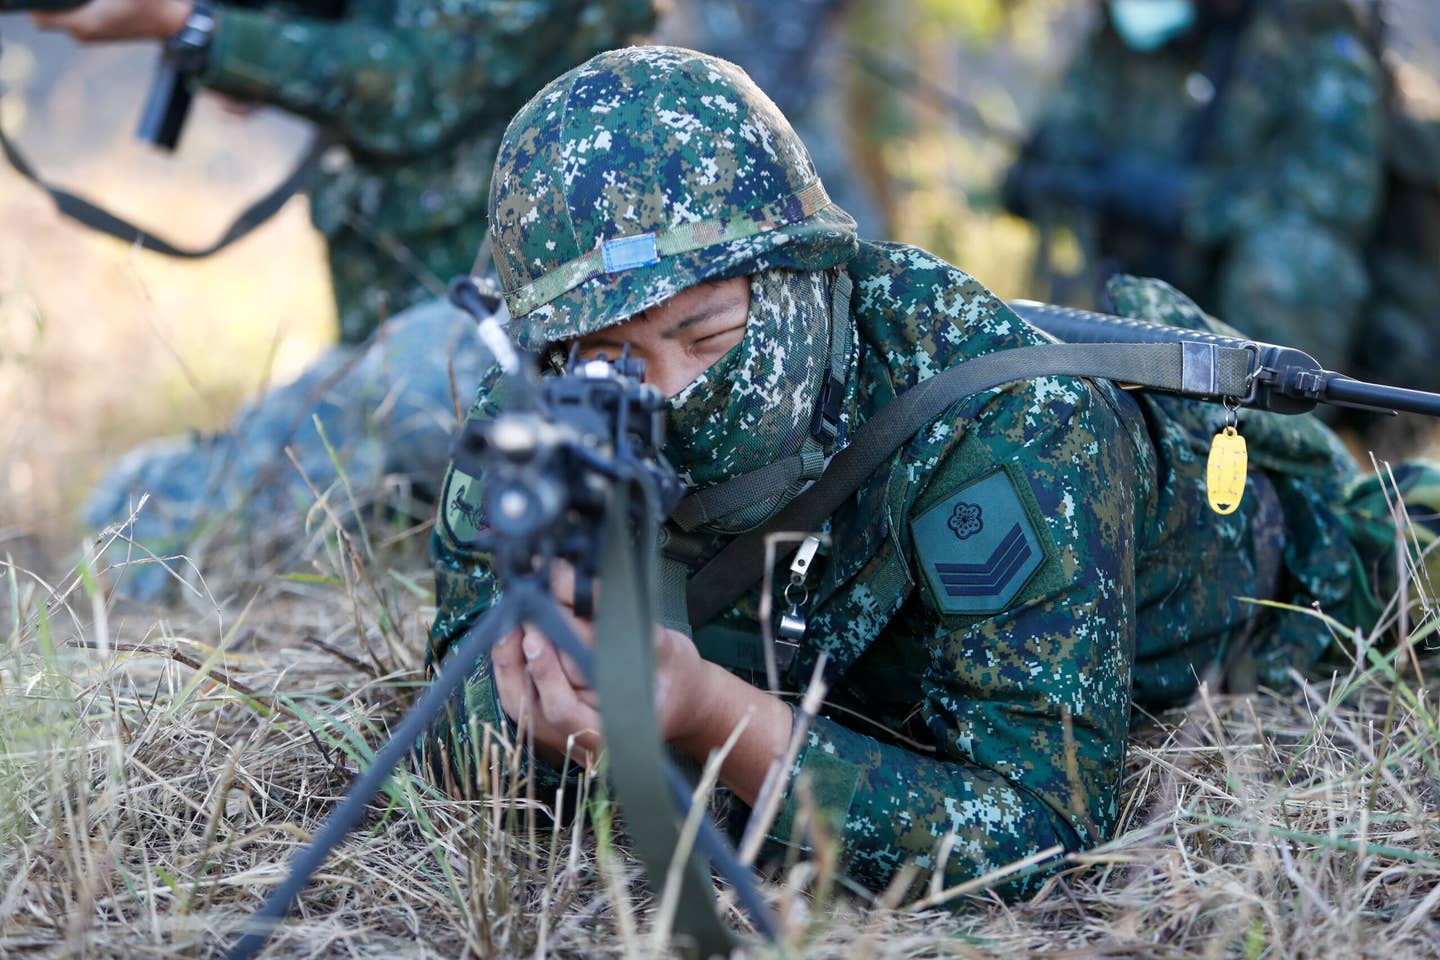 ROC Army soldiers during a shore defense operation as part of a military exercise simulating the defense against a Chinese invasion, during another period of high tensions between Taipei and Beijing, in November 2021. <em>Photo by Ceng Shou Yi/NurPhoto via Getty Images</em>